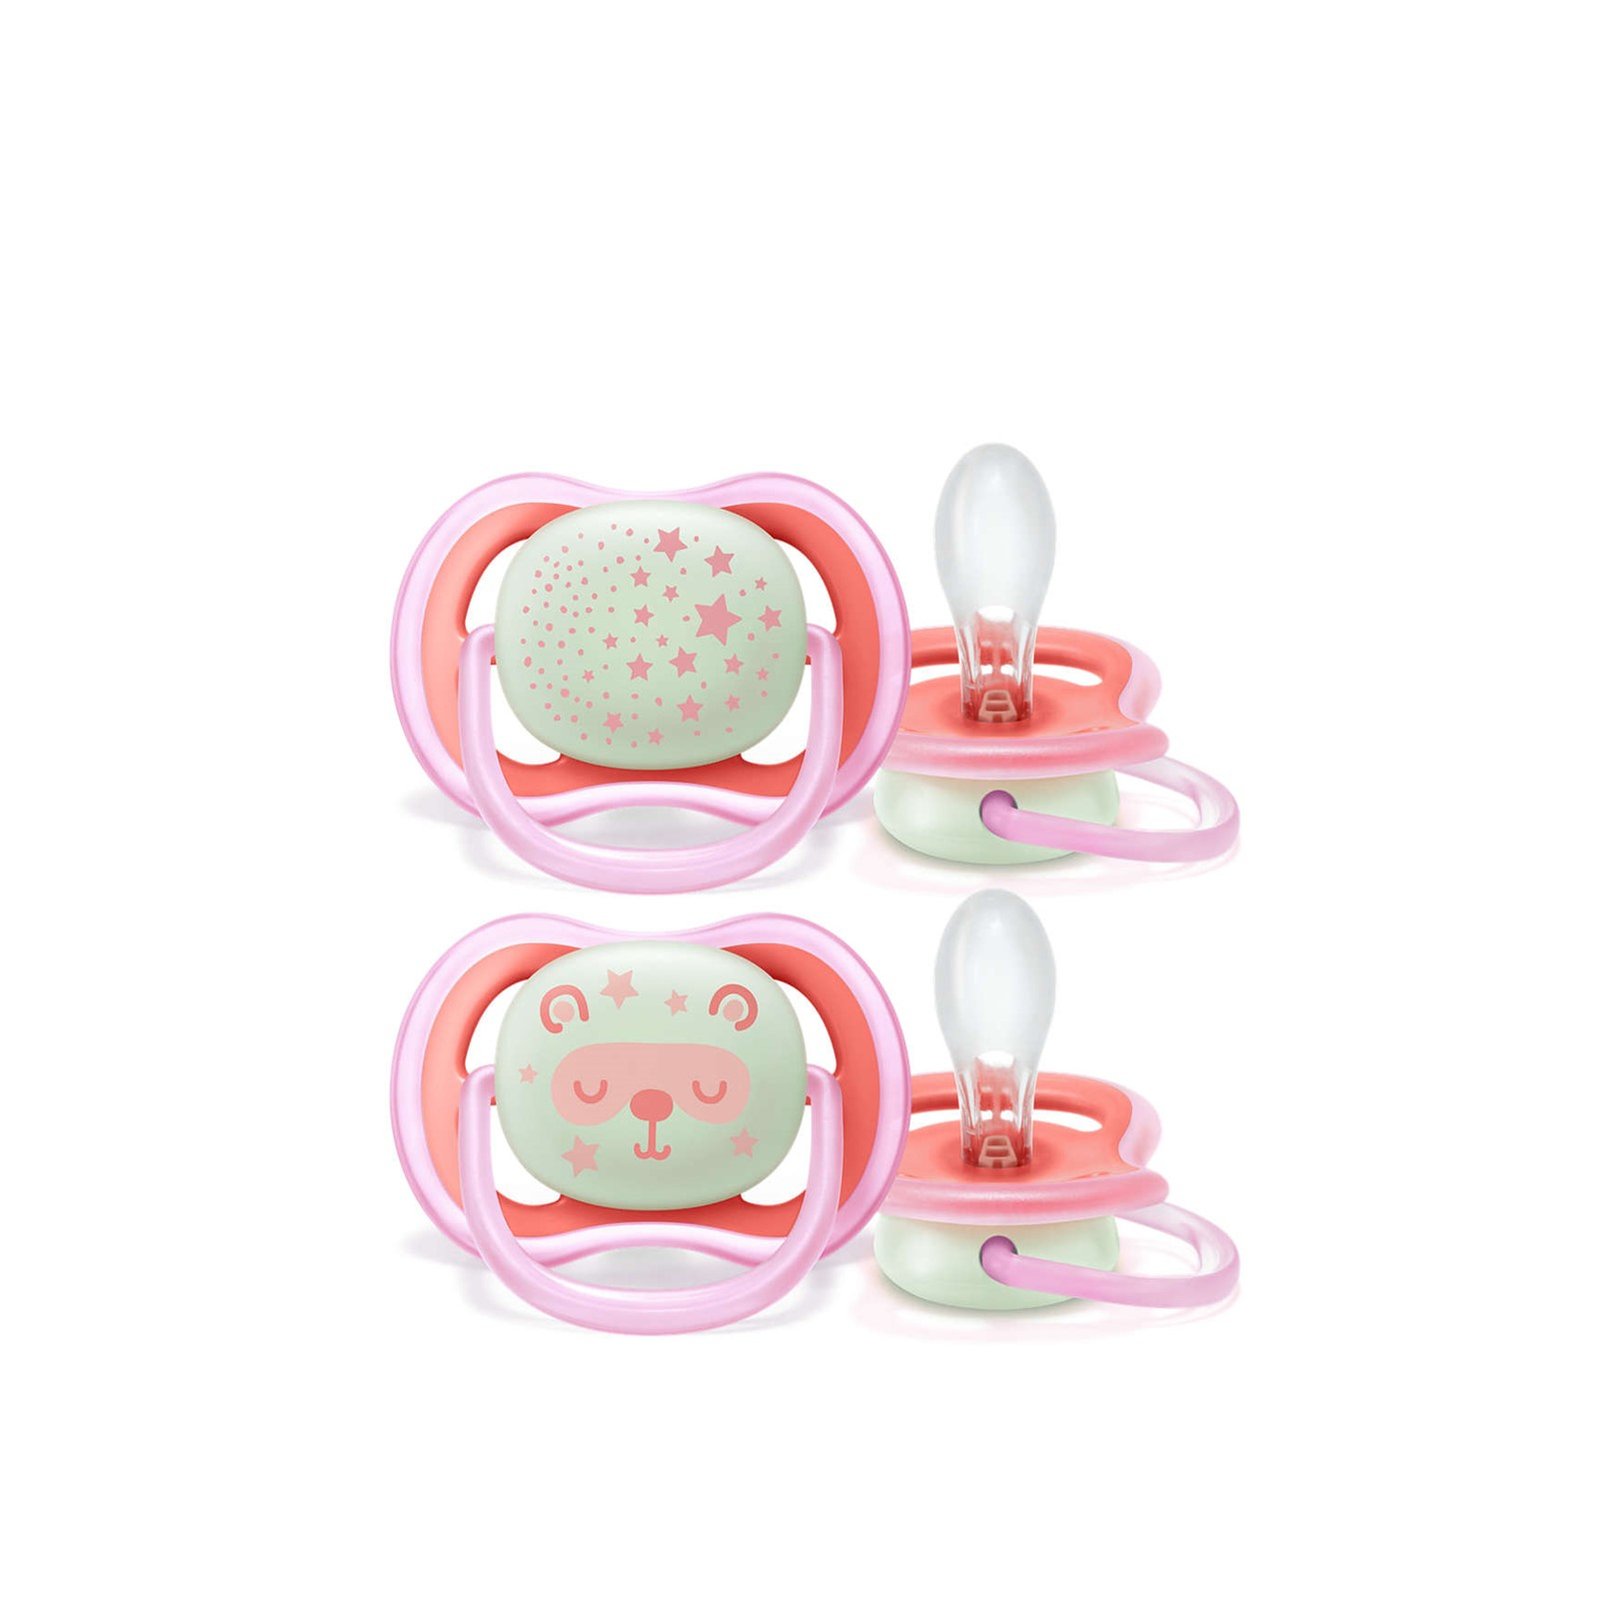 Philips Avent Ultra Air Night-Time Pacifier 6-18m x2